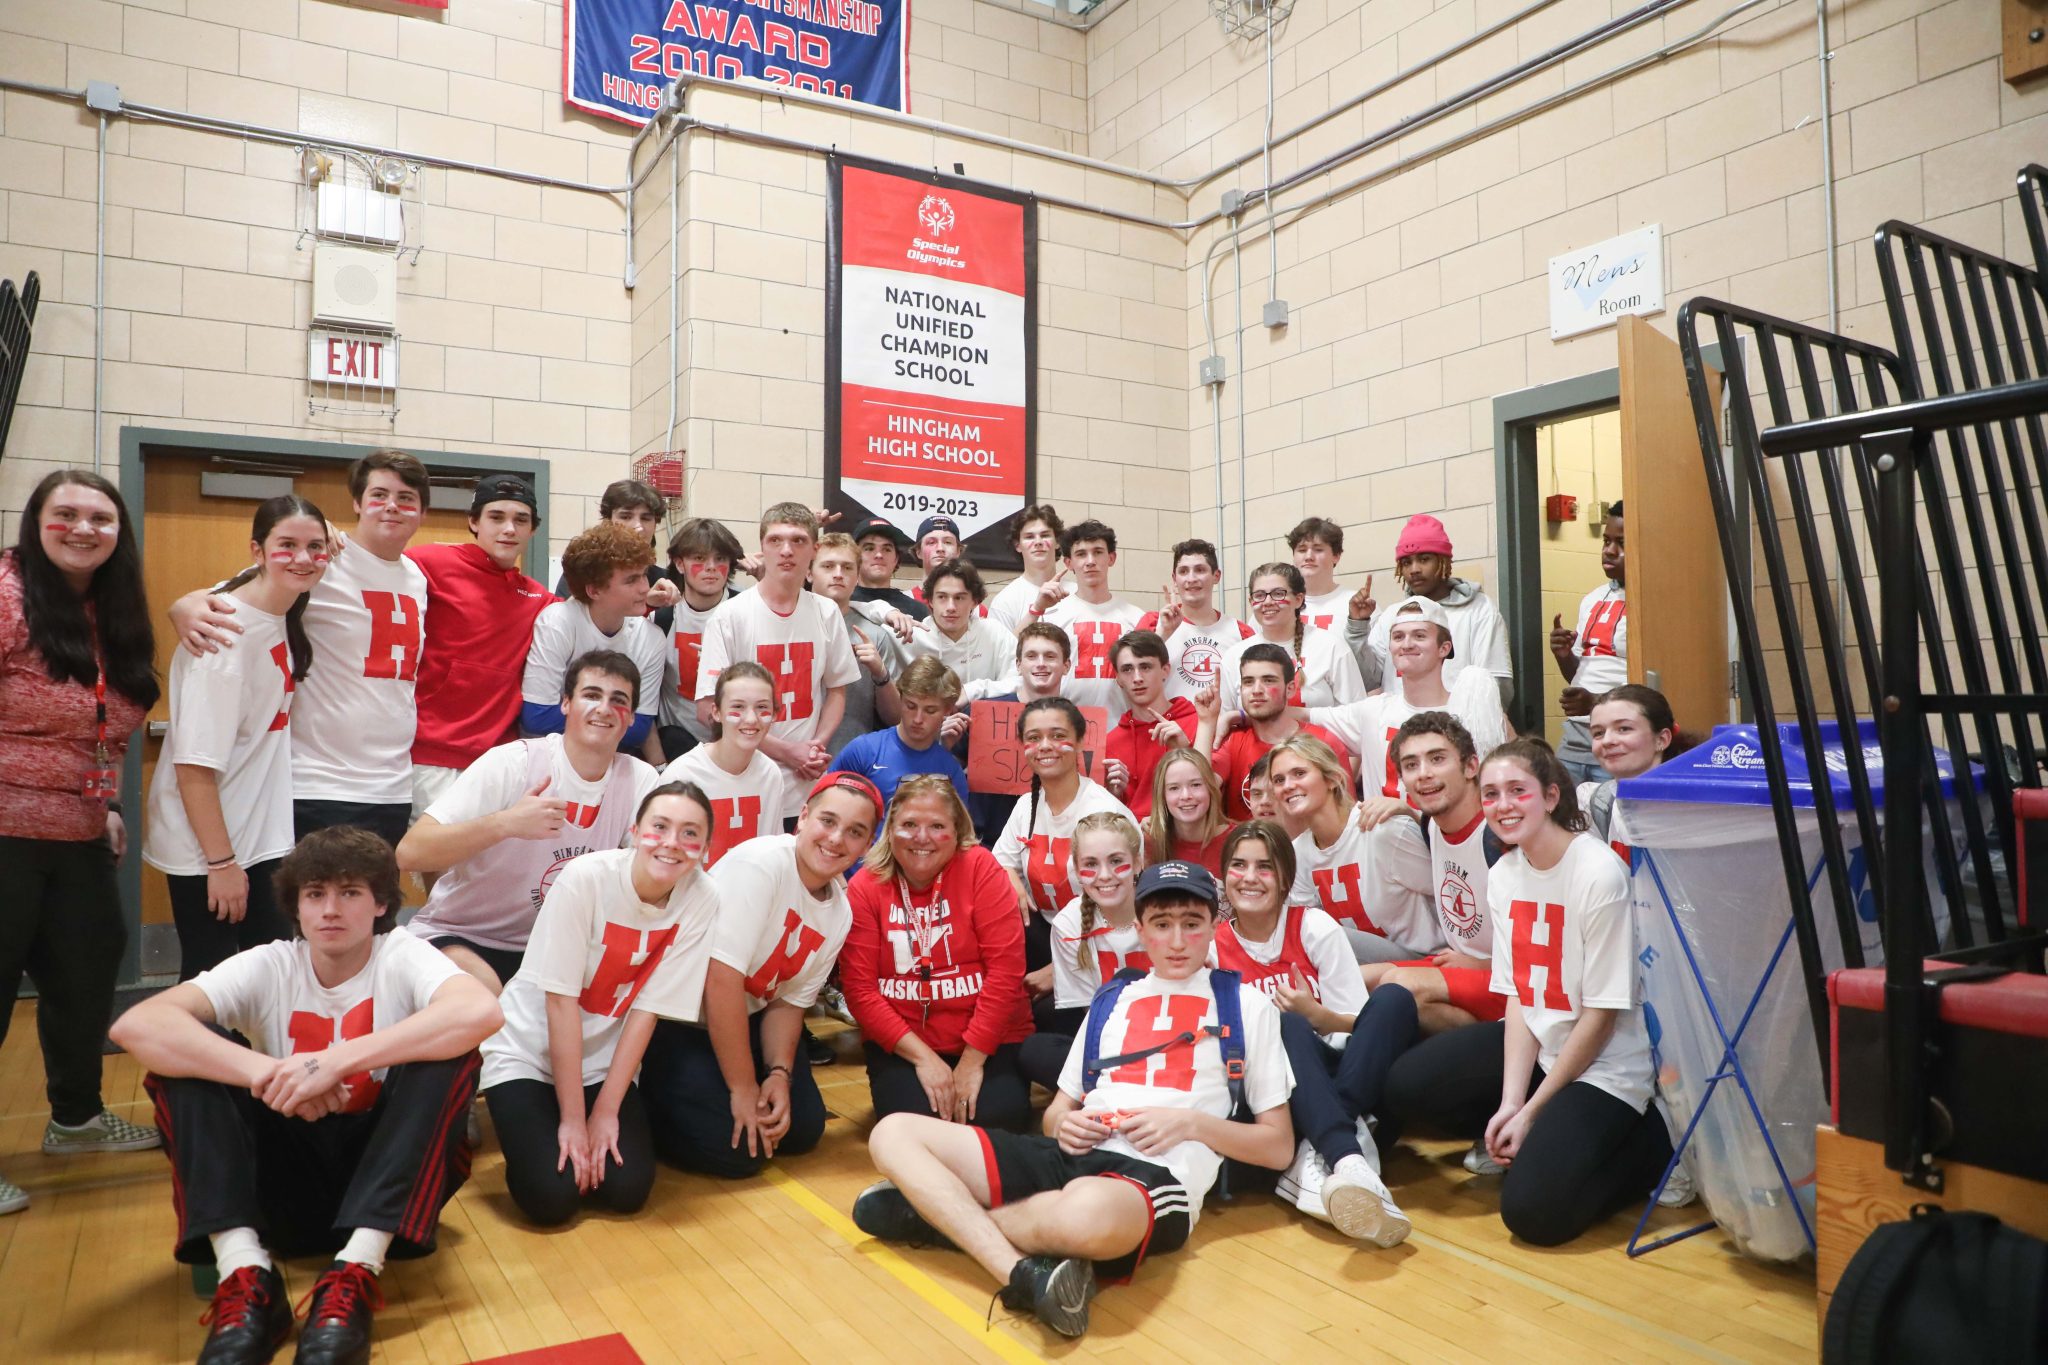 Members of Hingham's Unified basketball team unveiled the banner recognizing Hingham High as a Champion School by Special Olympics.